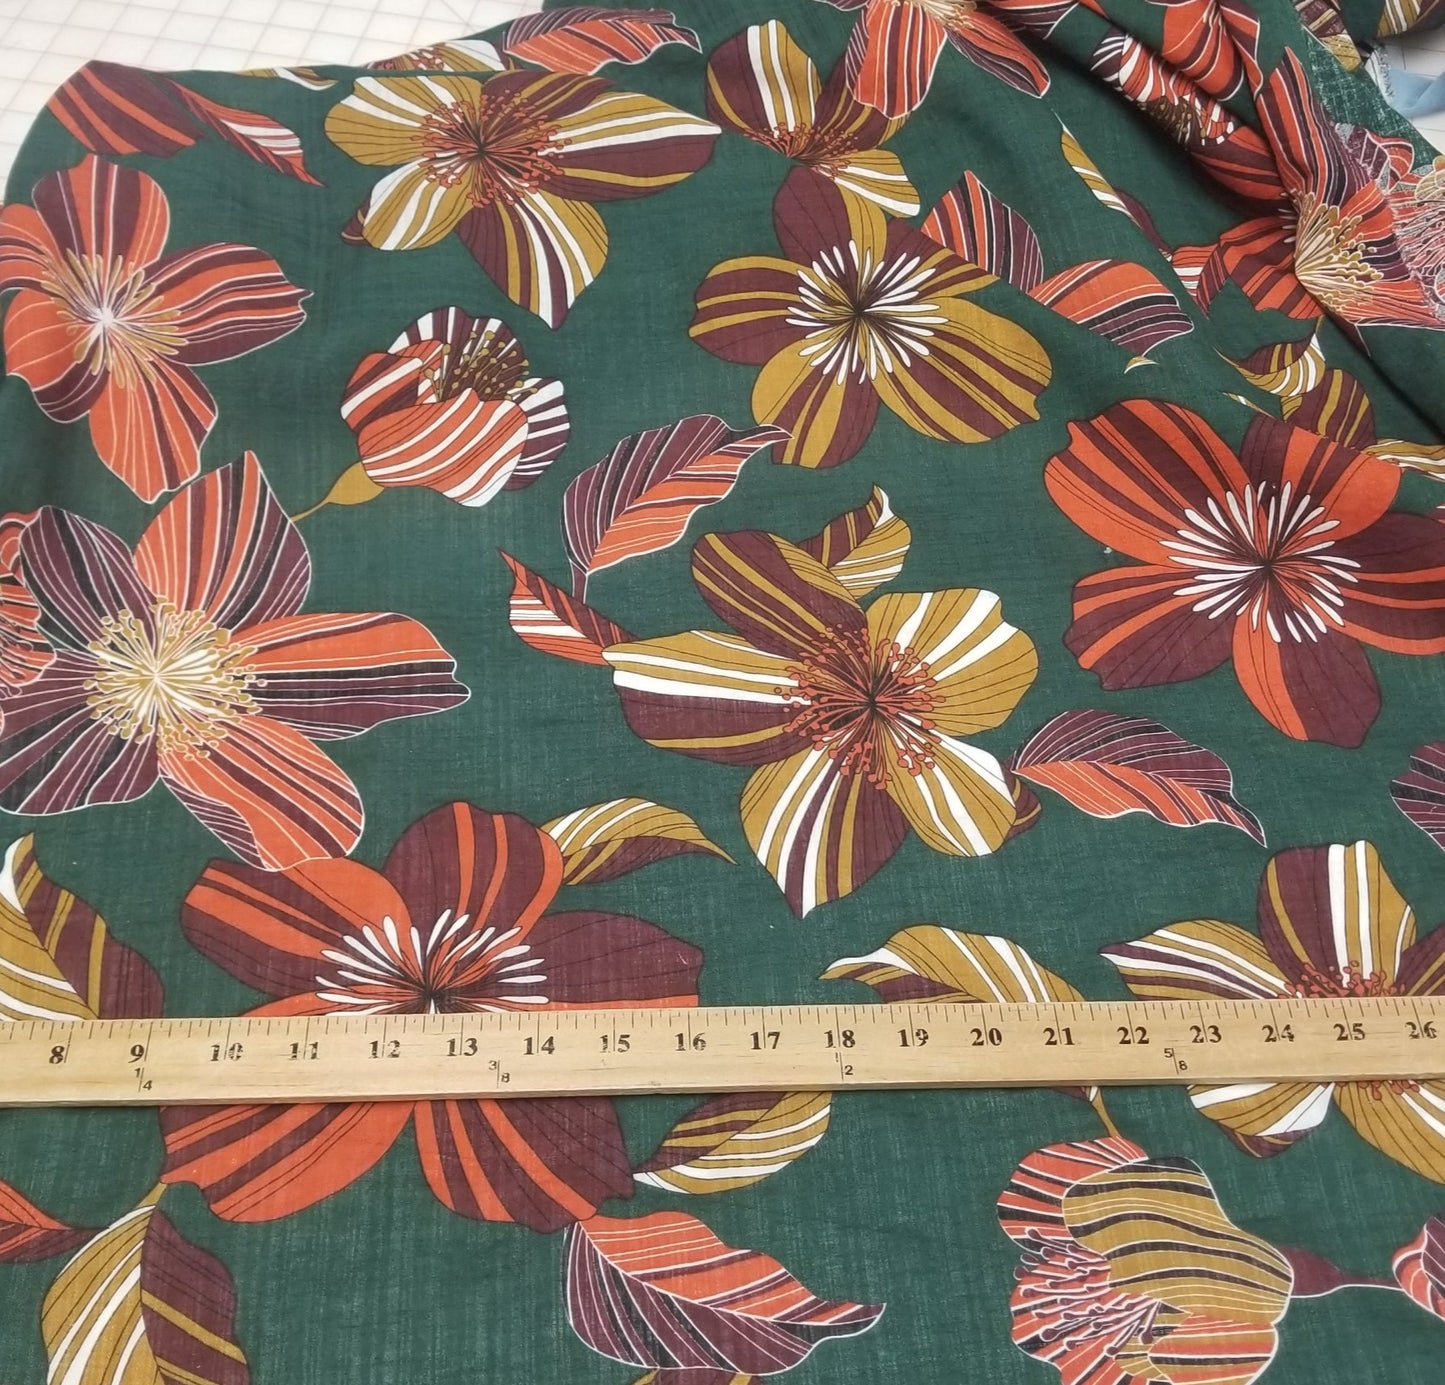 Designer Deadstock Hunter Green Florals Cotton Lawn 2.36 oz - Sold by the yard